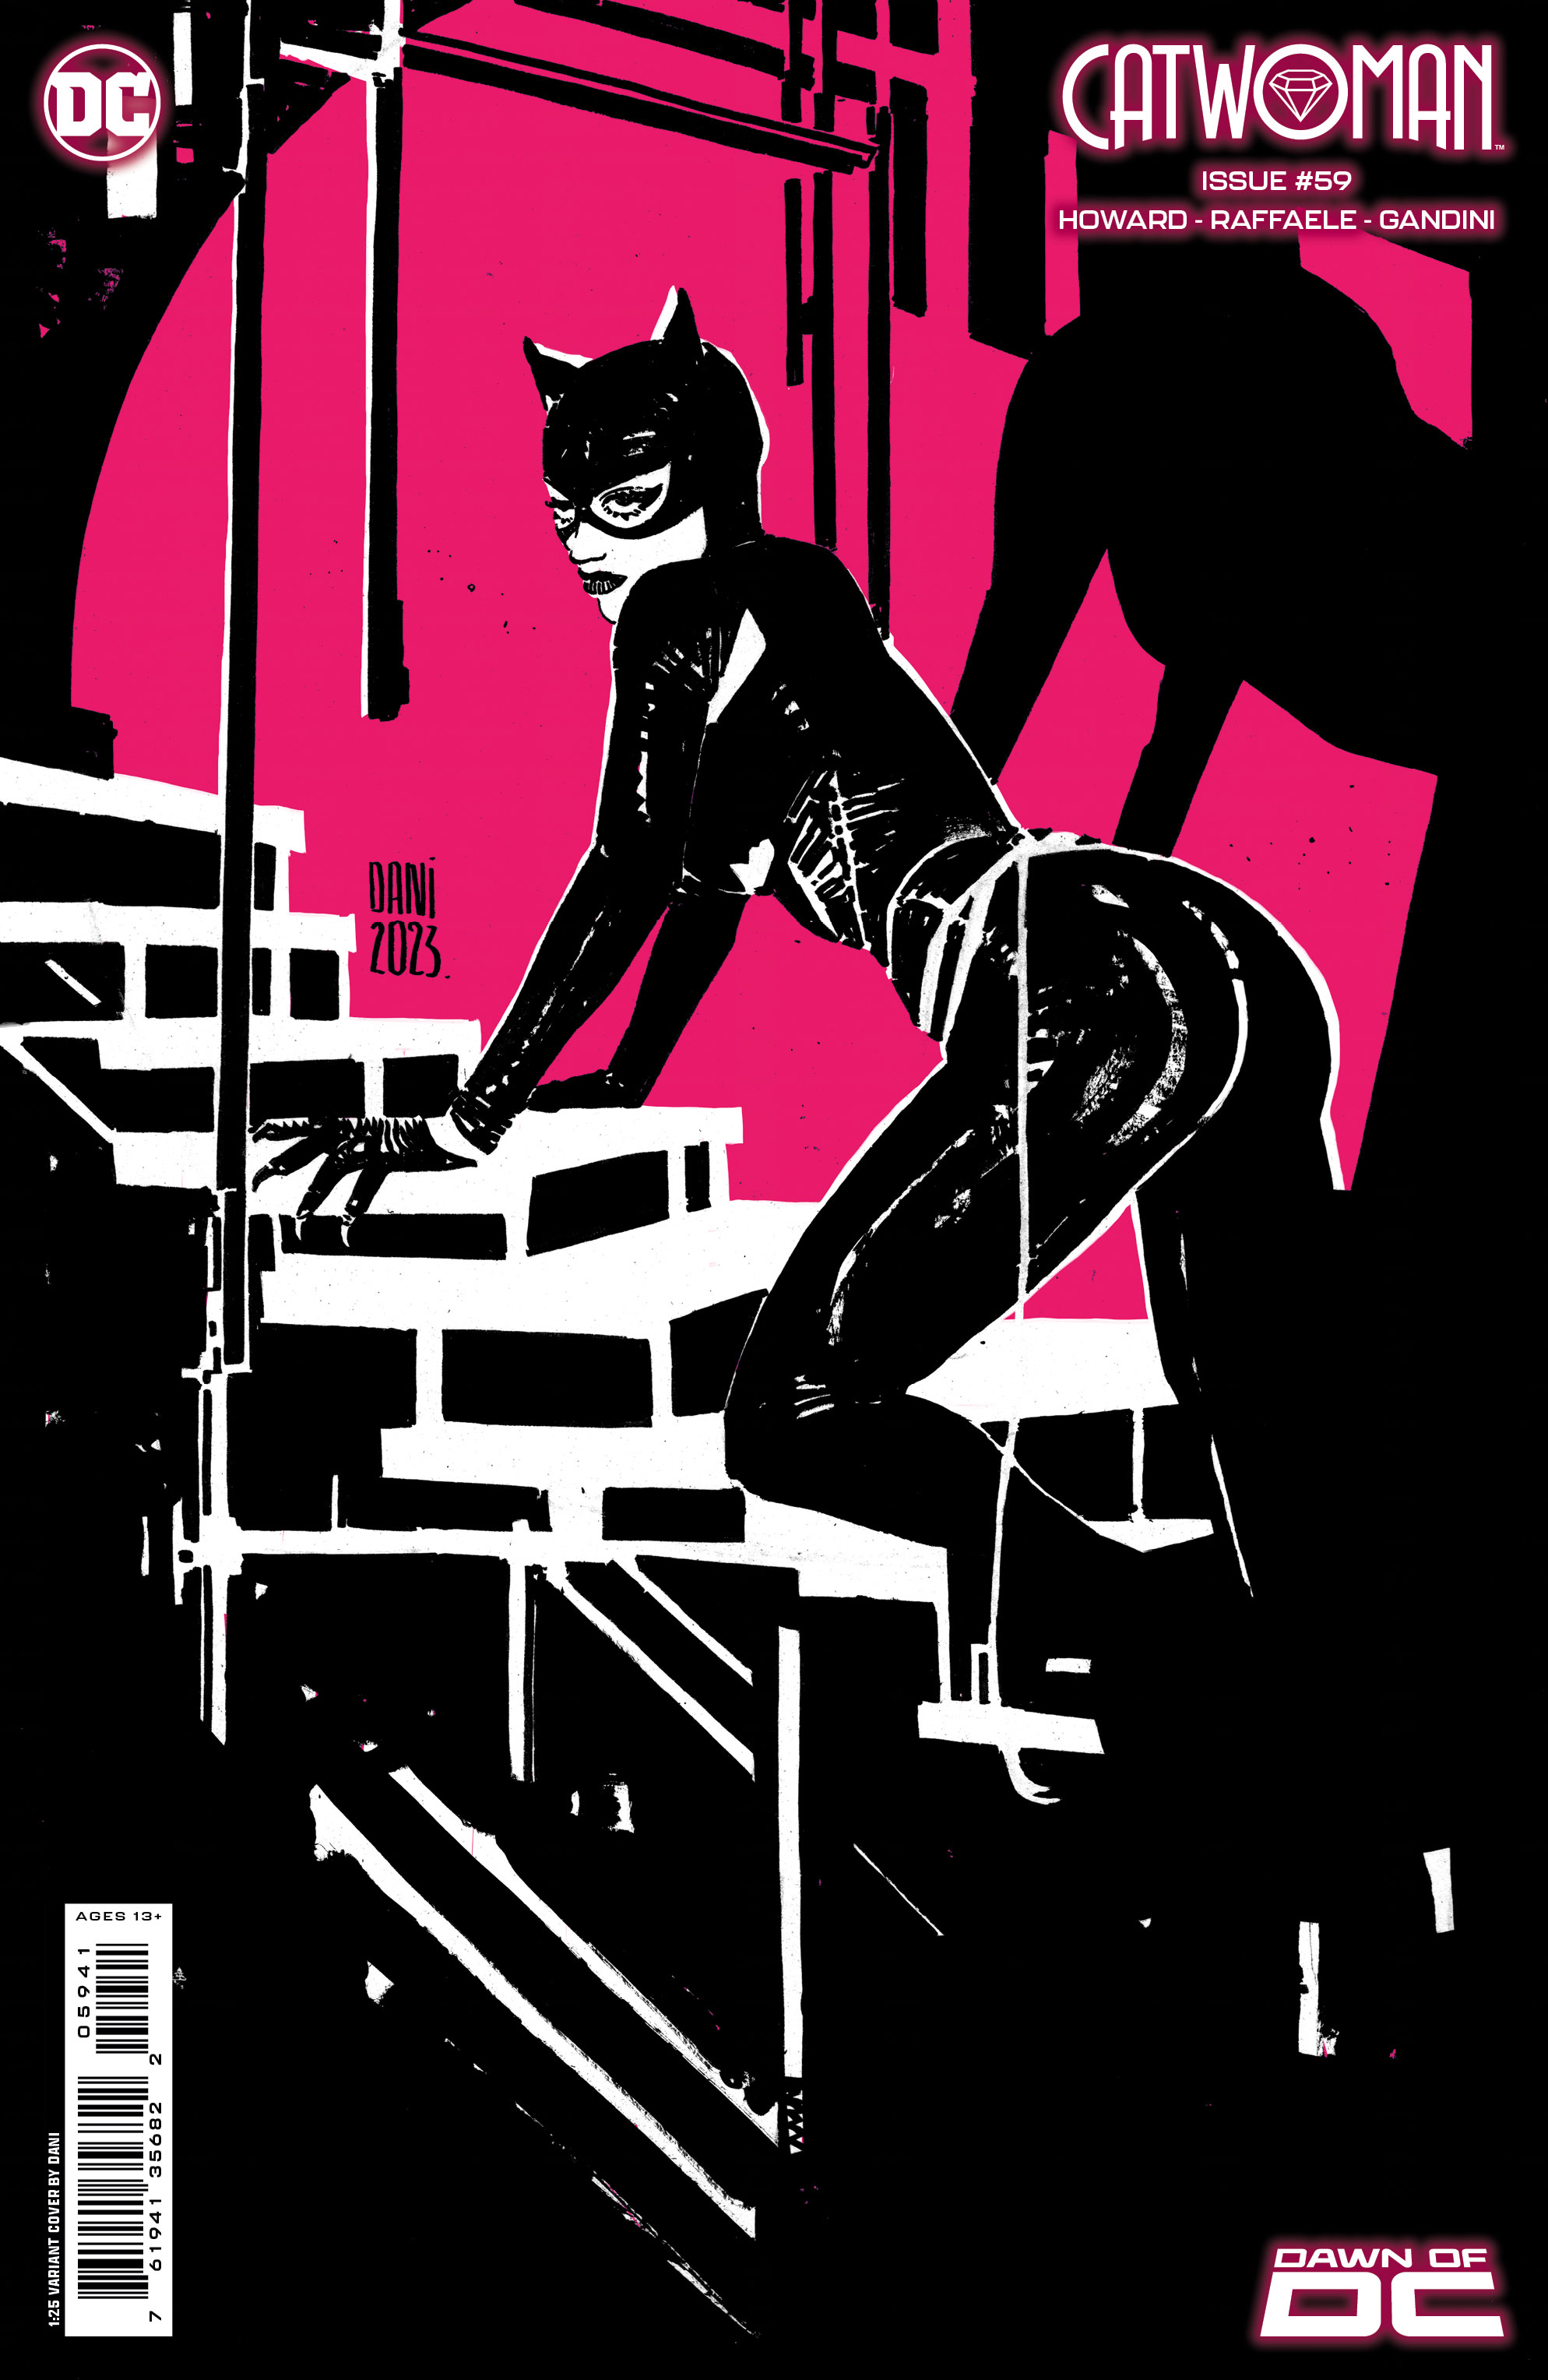 Catwoman #59 Cover D 1 for 25 Incentive Dani Card Stock Variant